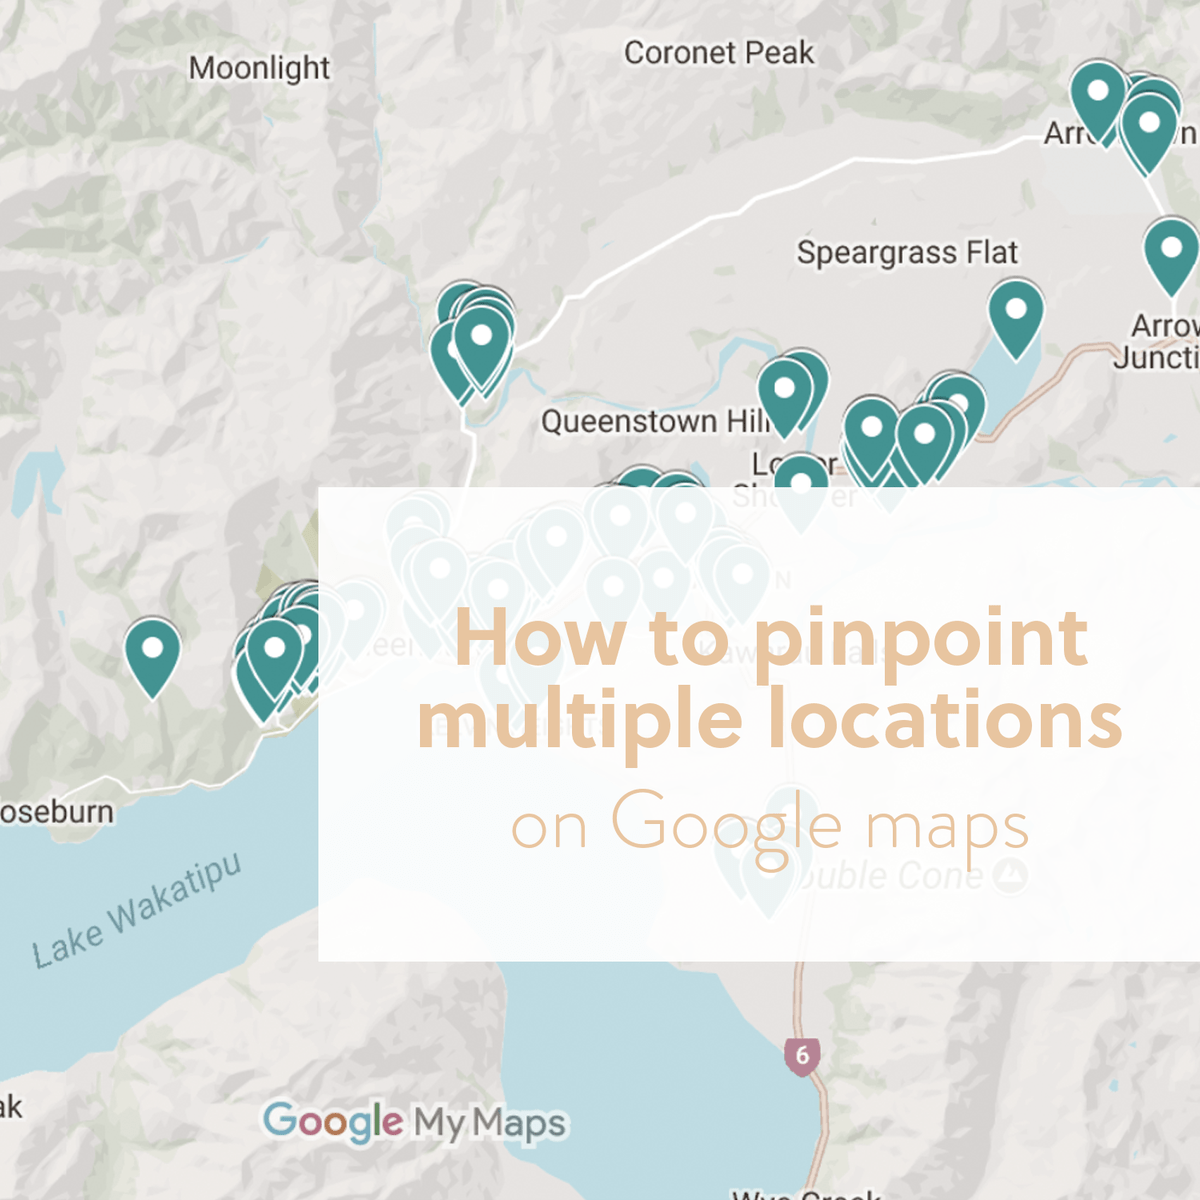 Can you put multiple locations on a Google map?